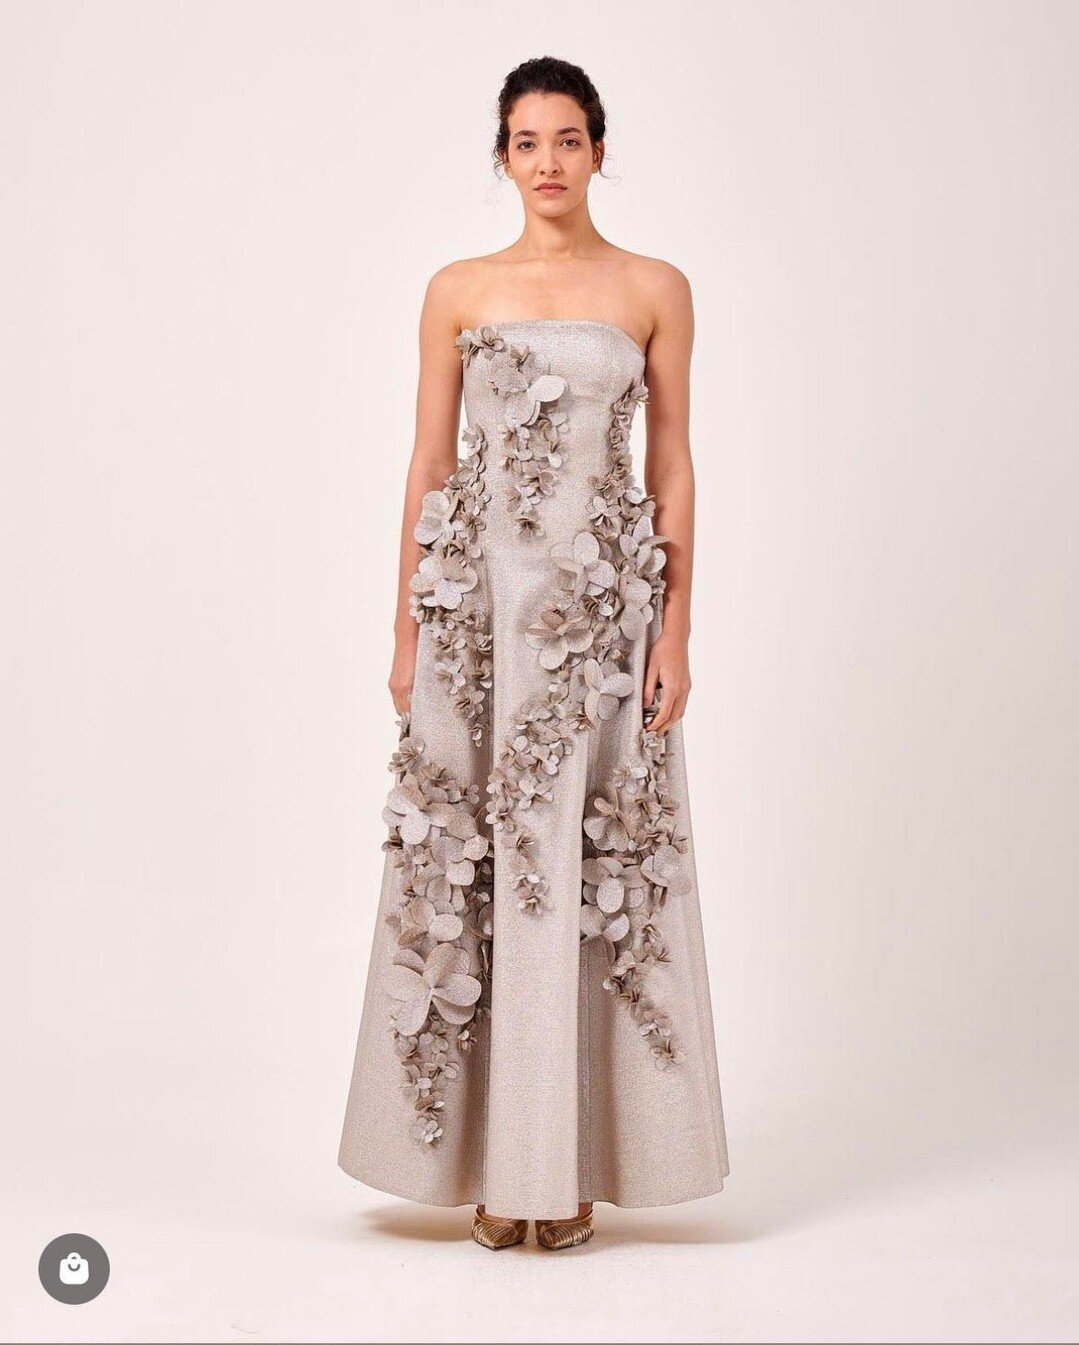 Three dimentional flowered long gown by @Johnpaulataker is designed with romatic, strategically placed flowers covering the silhouette. Great choice for a unique #MOBgown.

Visit our store to try this style on.

#luxurybride#wedding2023#bride2023#nyb